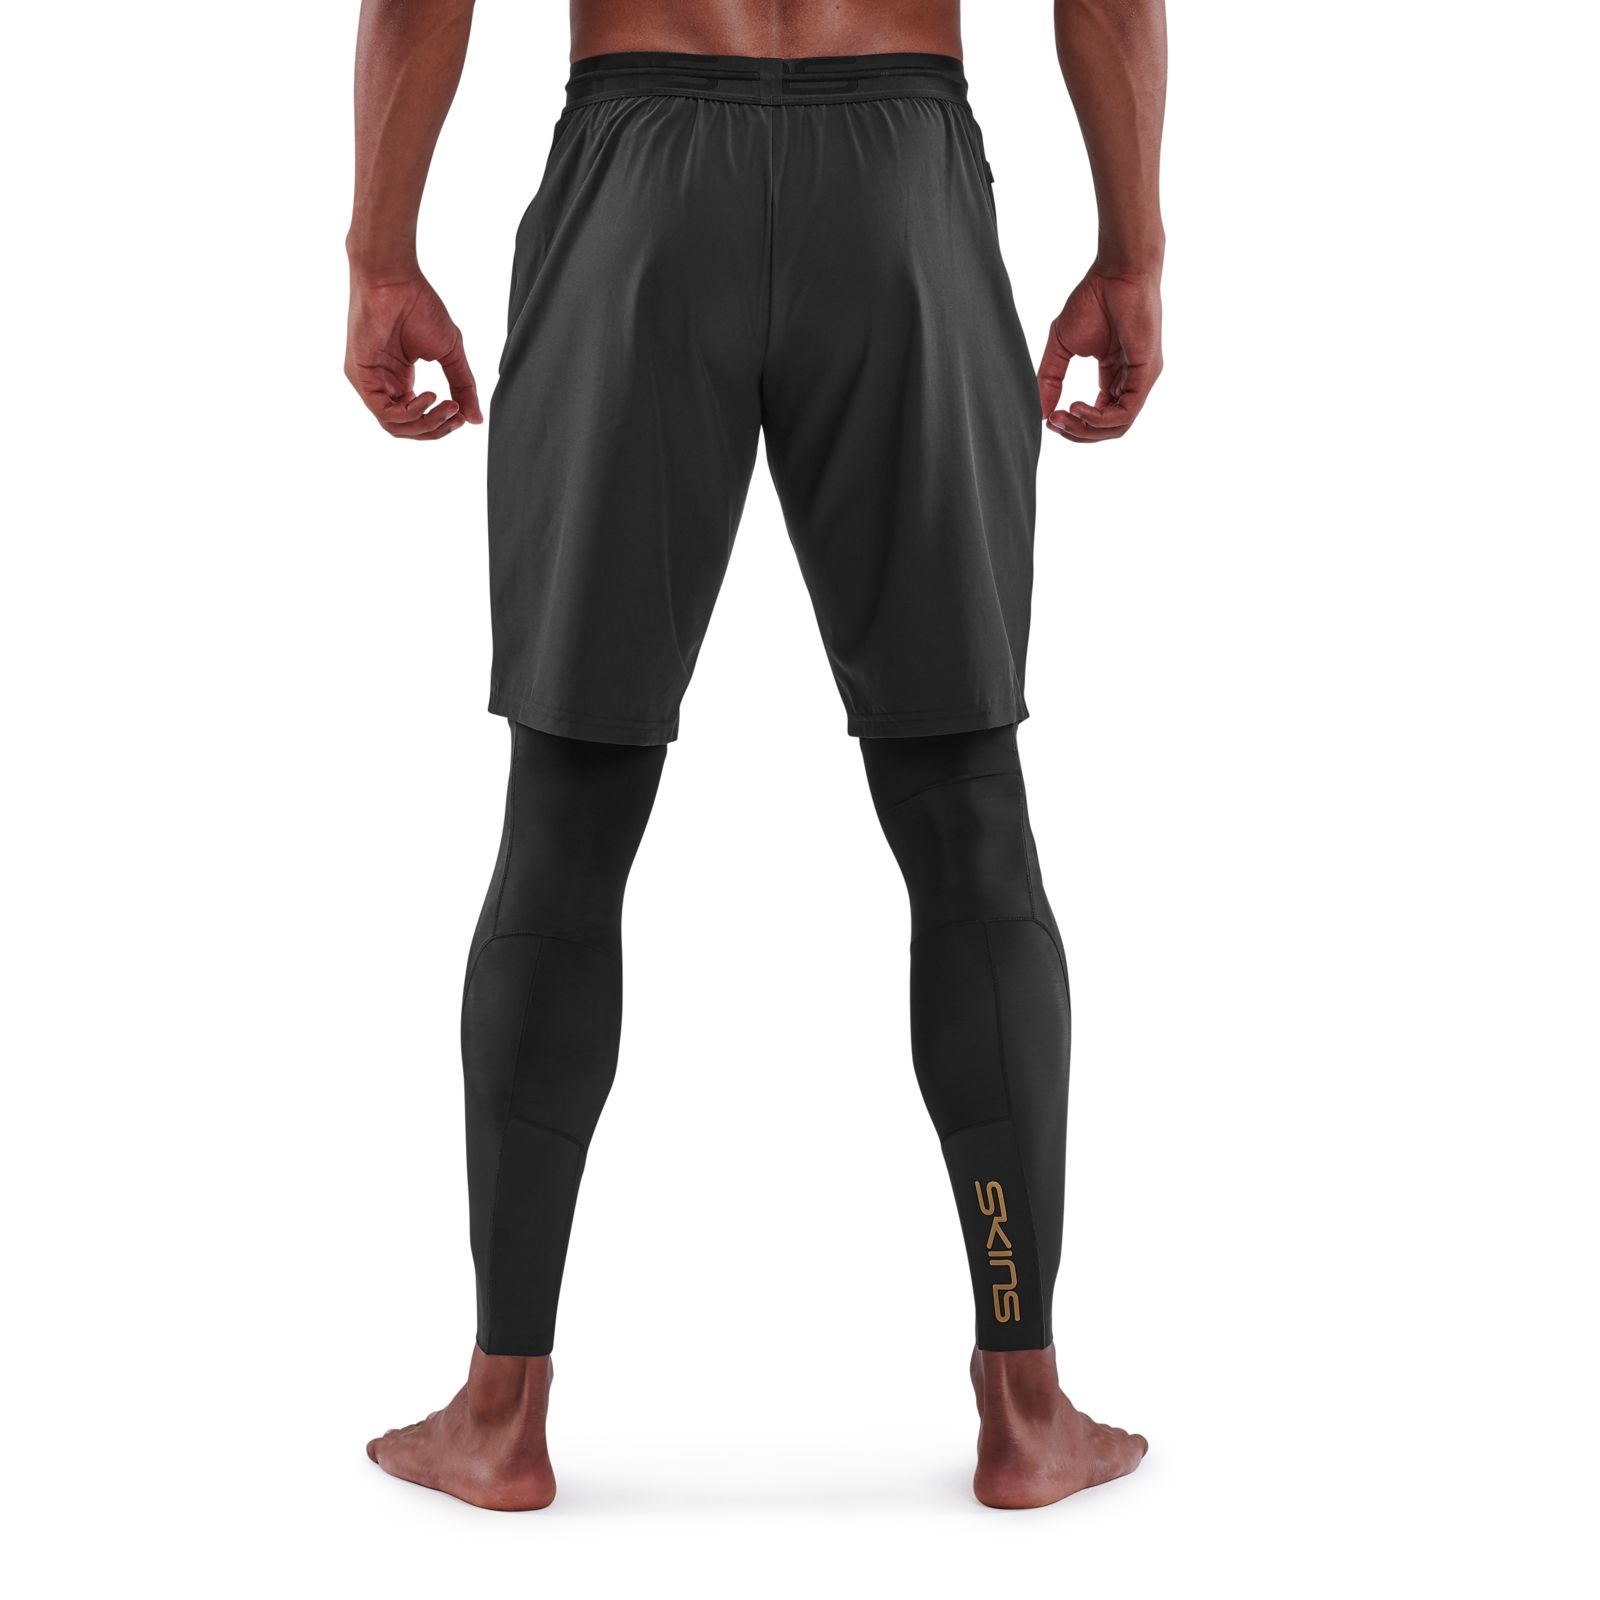 SKINS COMPRESSION Series-5 Men's Long Black Tights Small